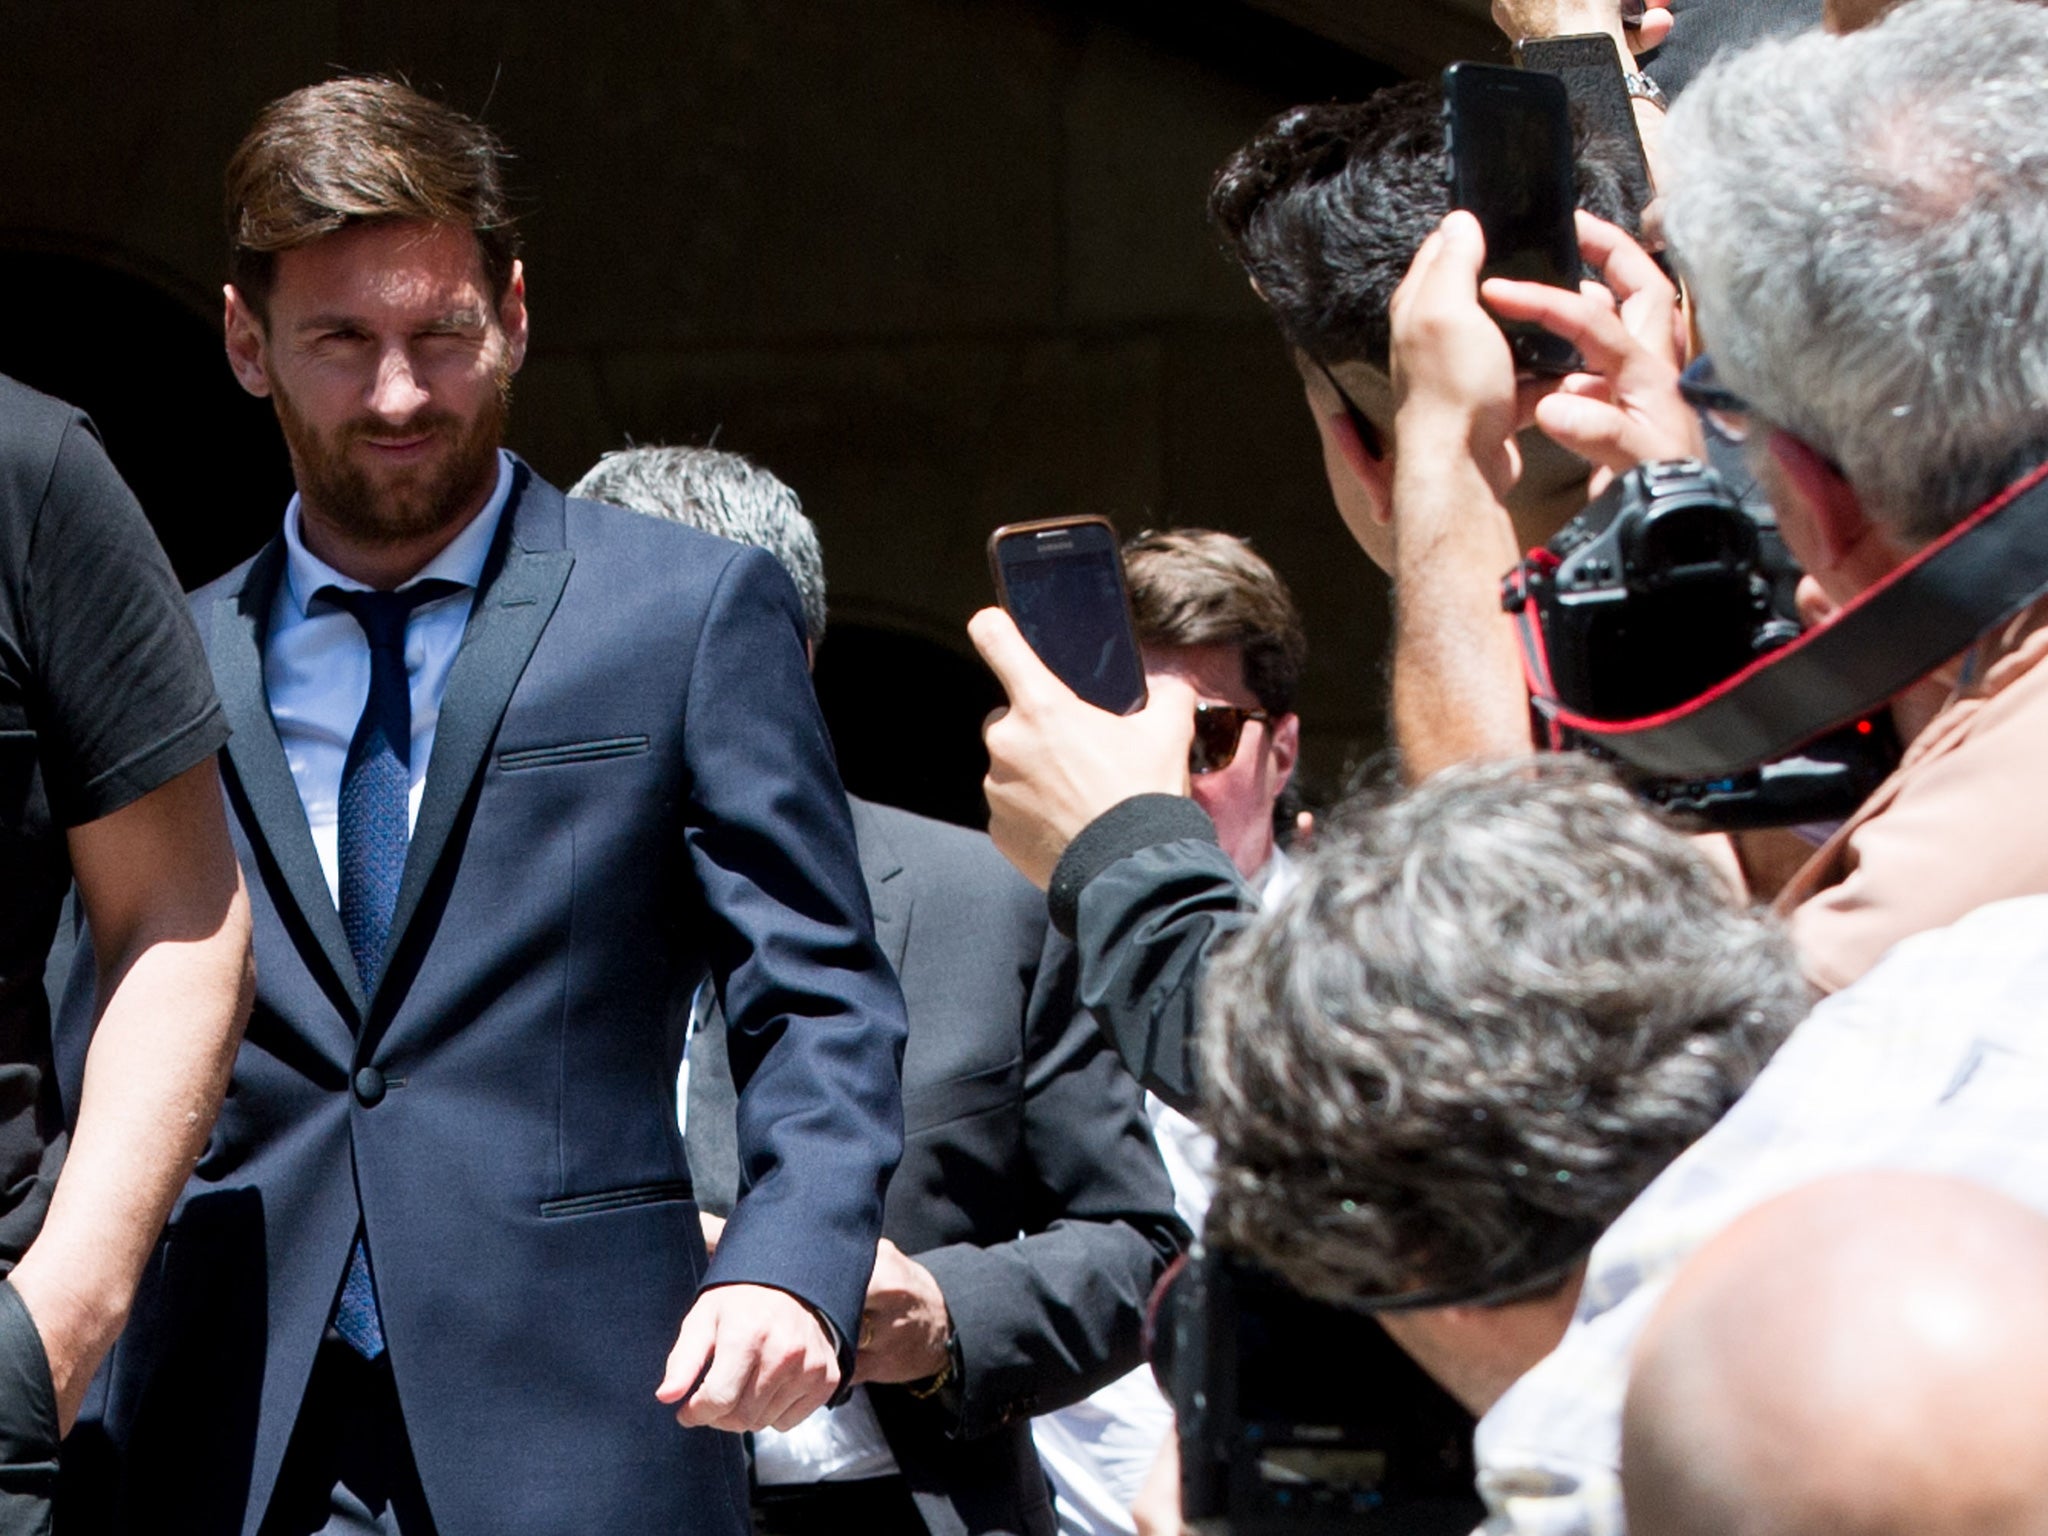 Messi was handed a 21 month jail sentence but is unlikely to go behind bars